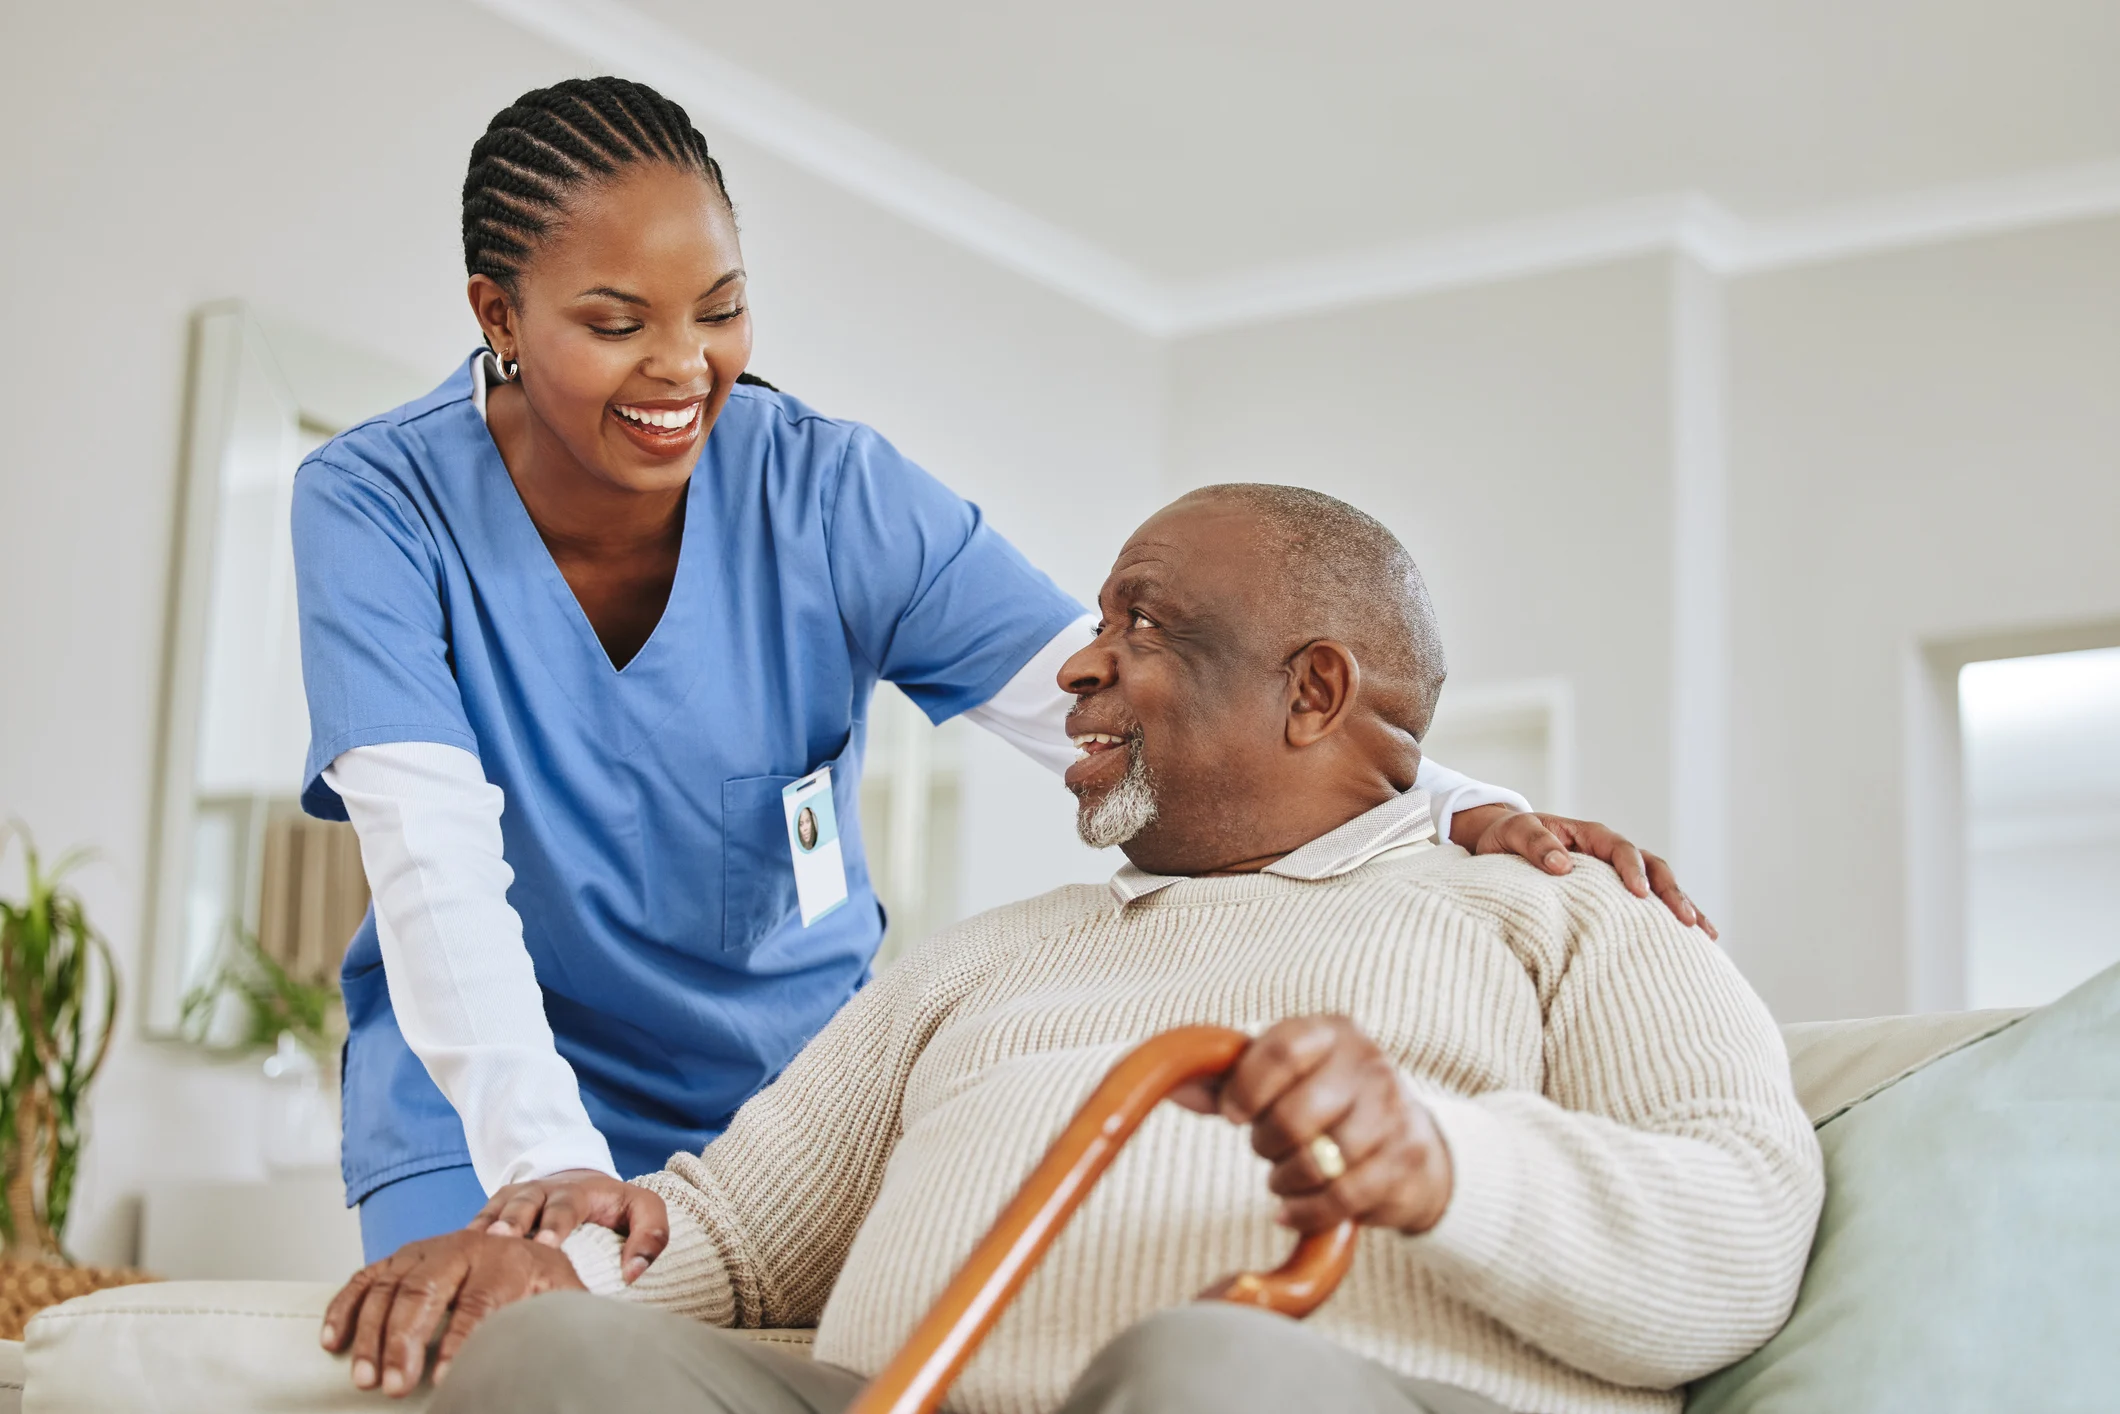 “Home Health Care Technology: Innovations Improving Remote Monitoring and Care”